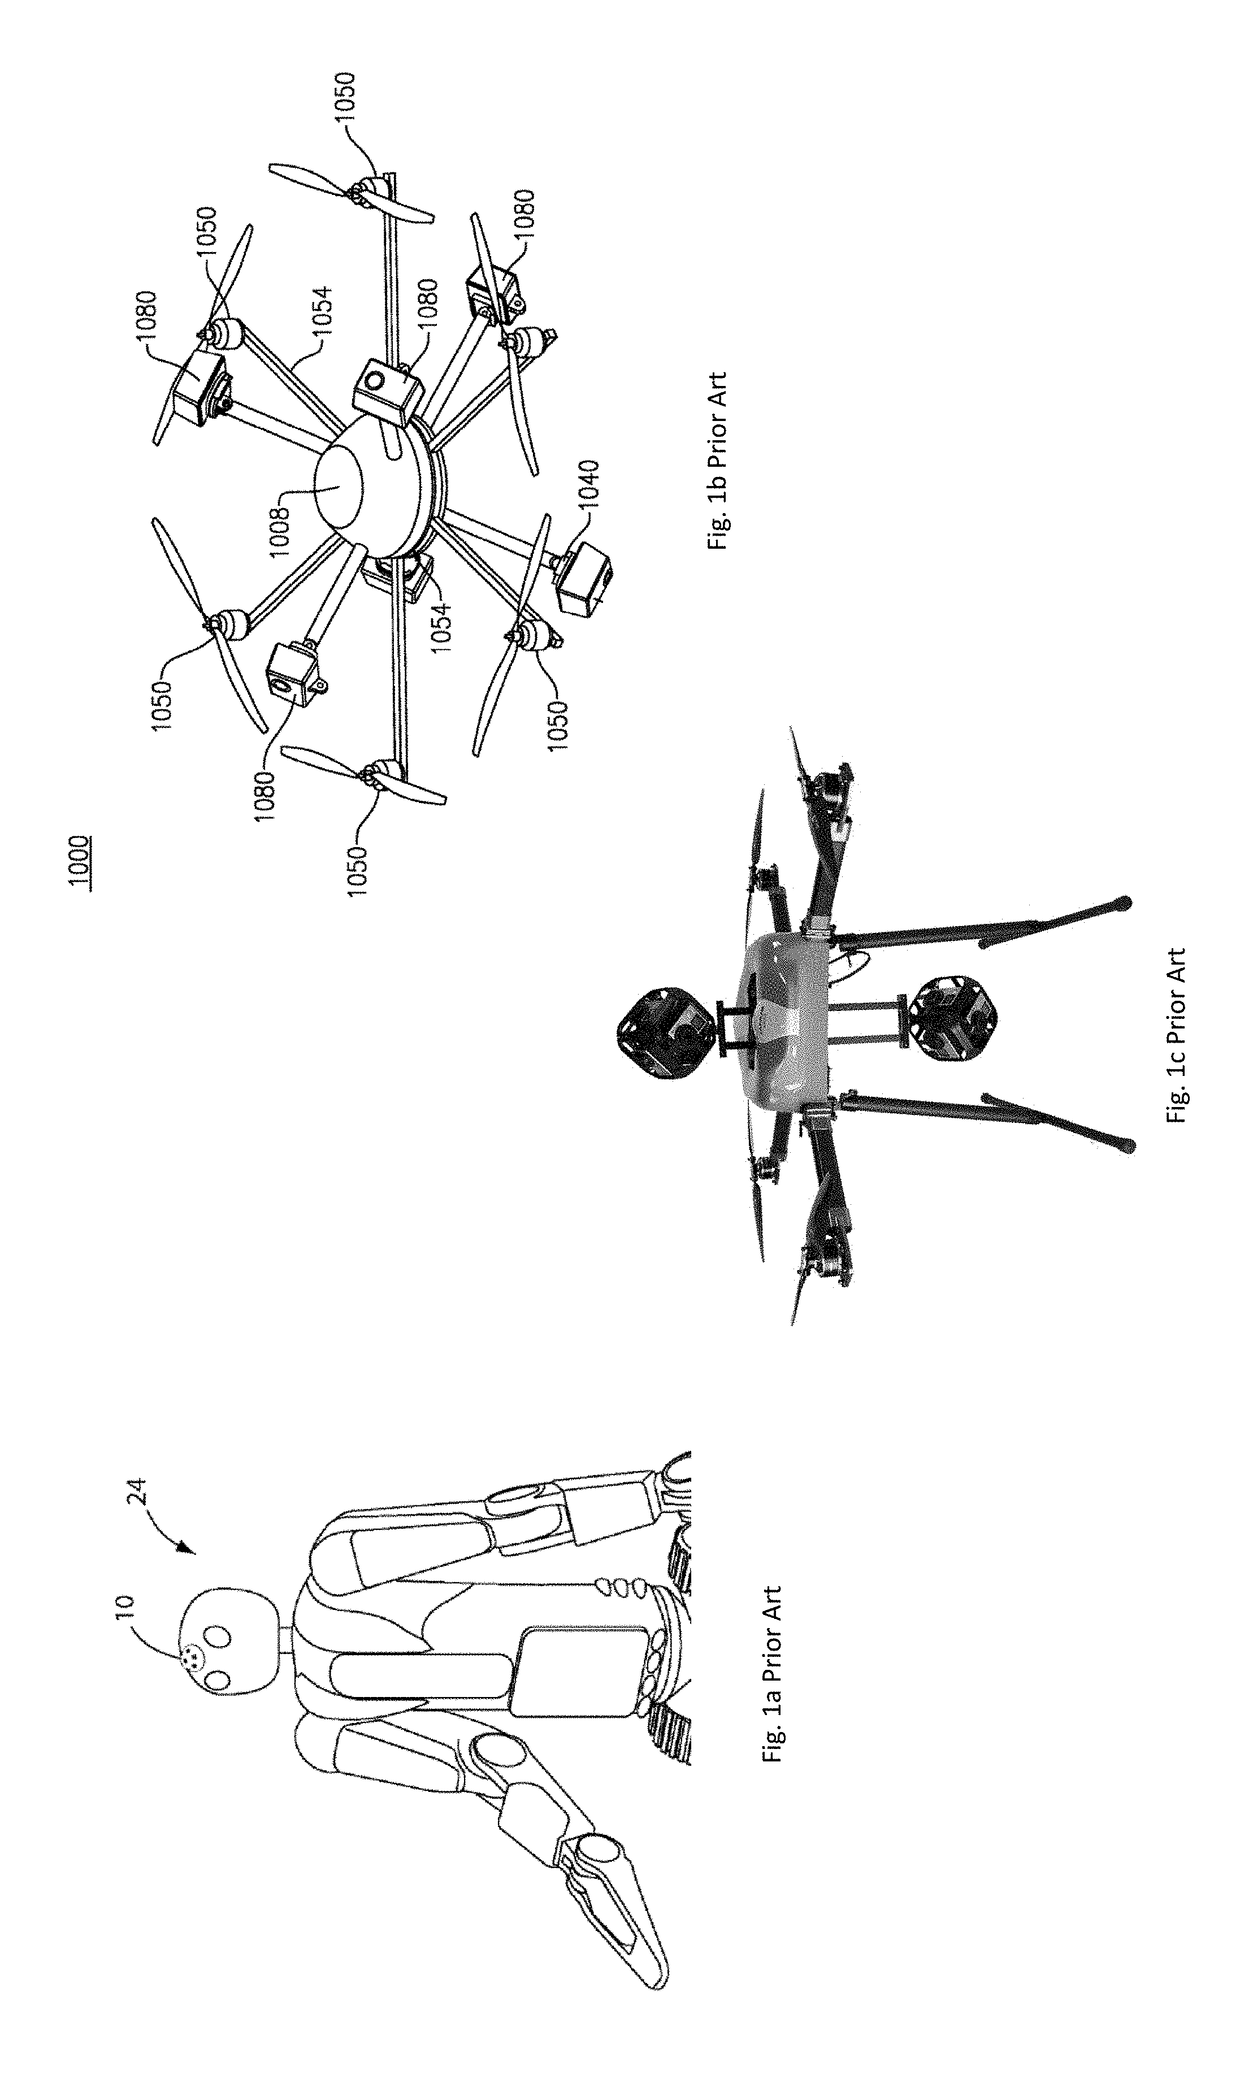 Method and apparatus for an unmanned aerial vehicle with a 360-degree camera system